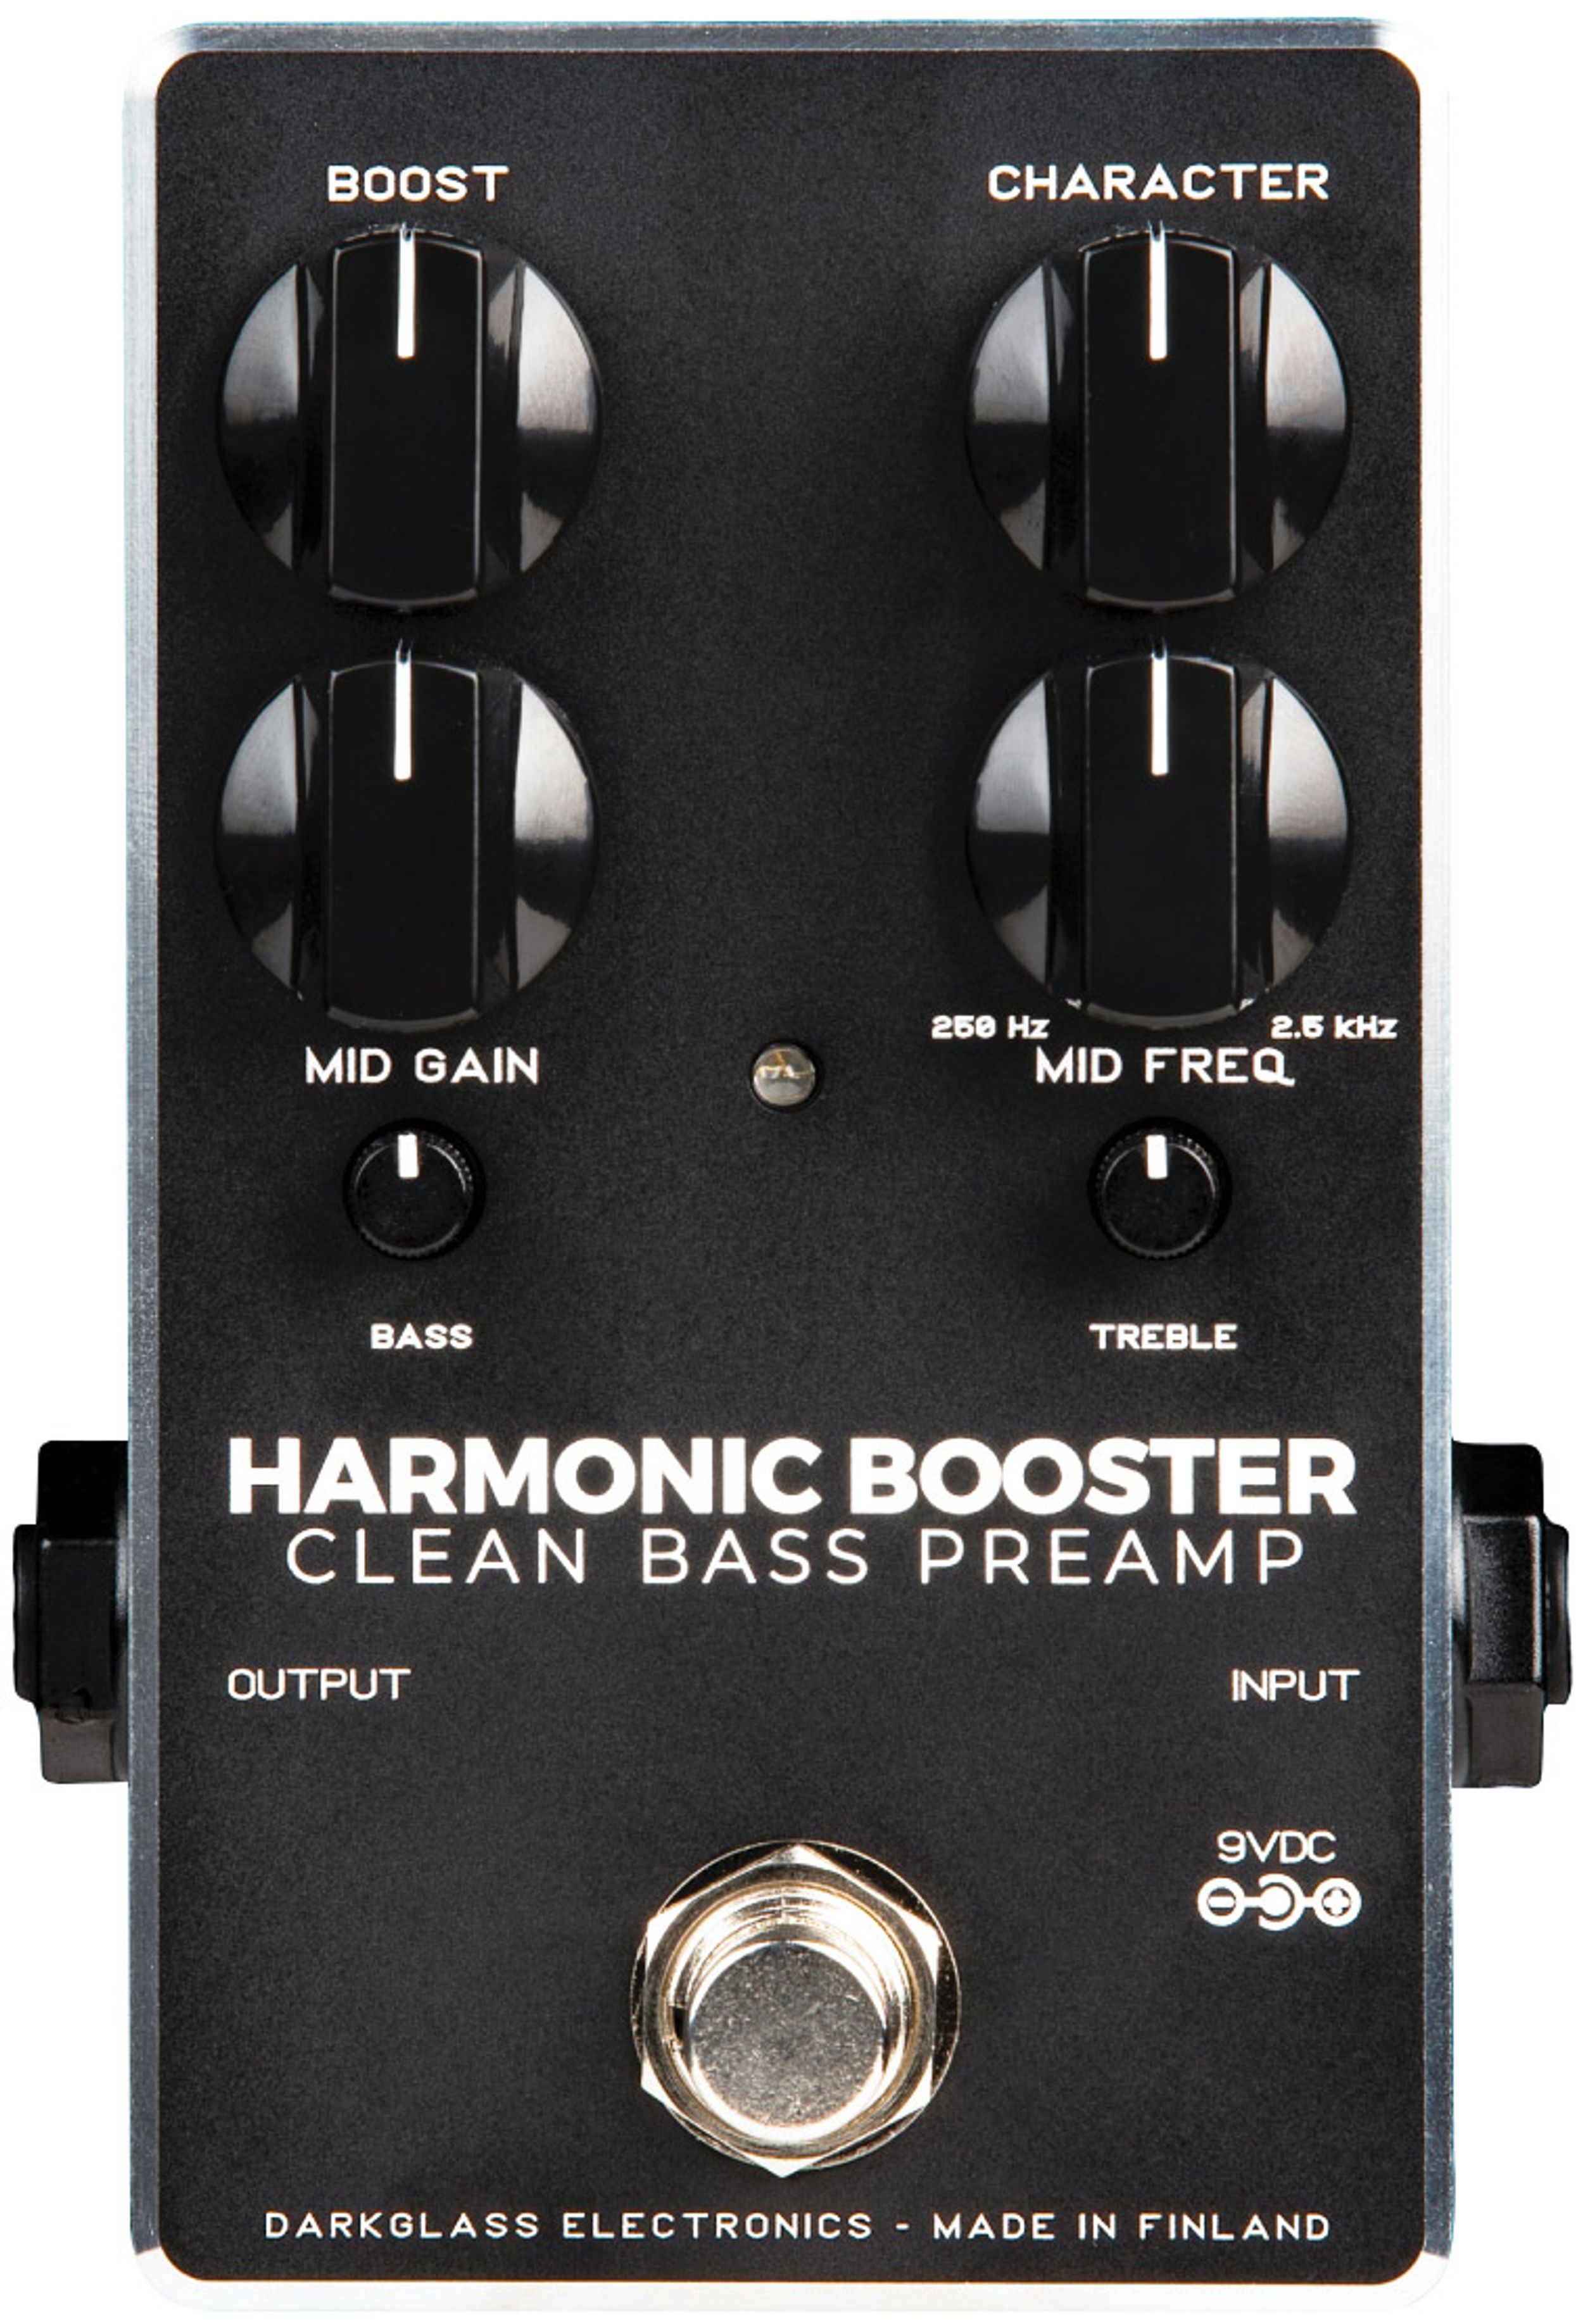 Darkglass Electronics Harmonic Booster Review